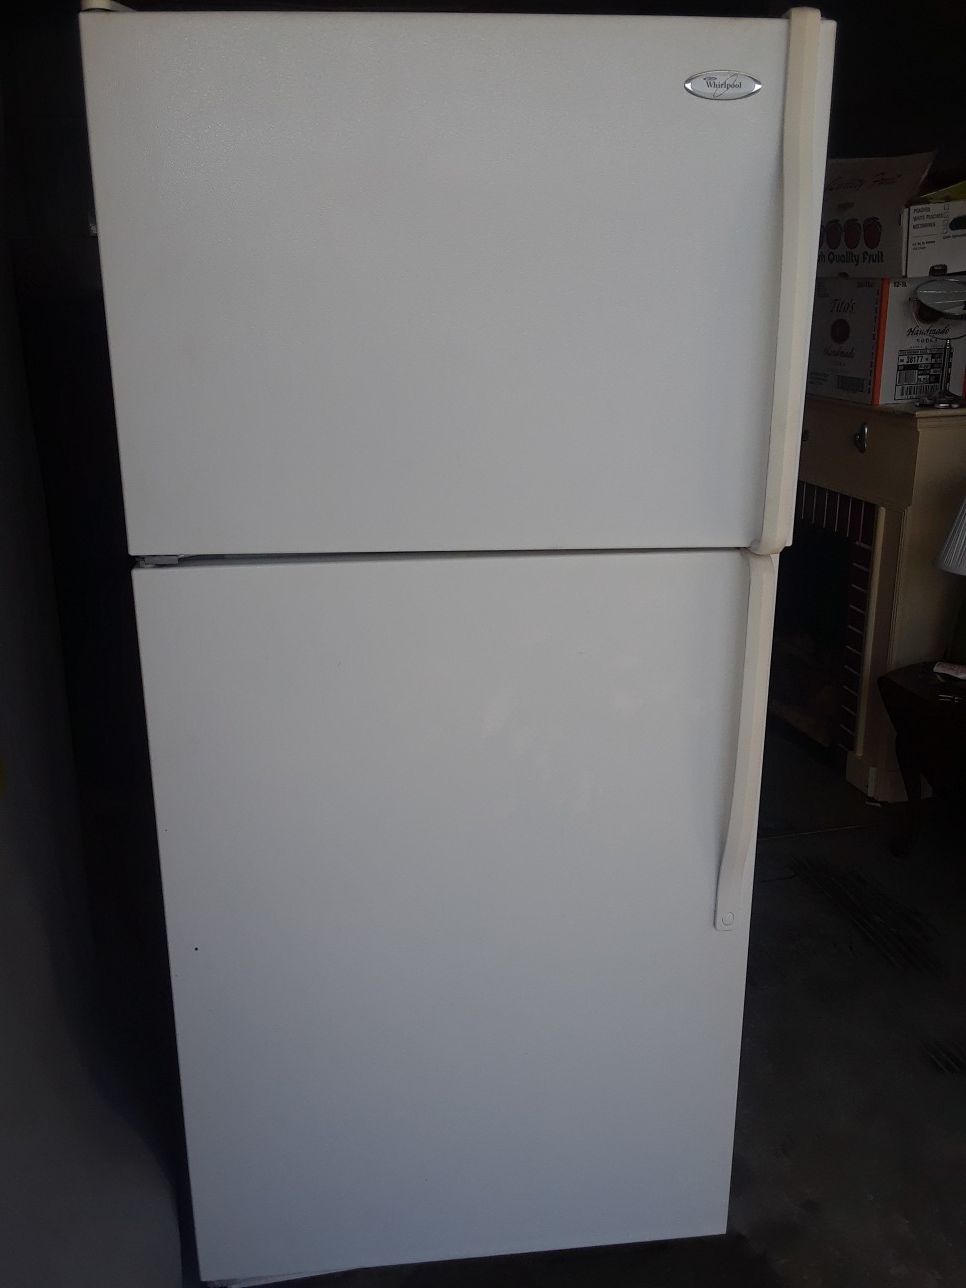 Refrigerator full size by whirlpool exc cond works great $185 firm Elkton pickup only